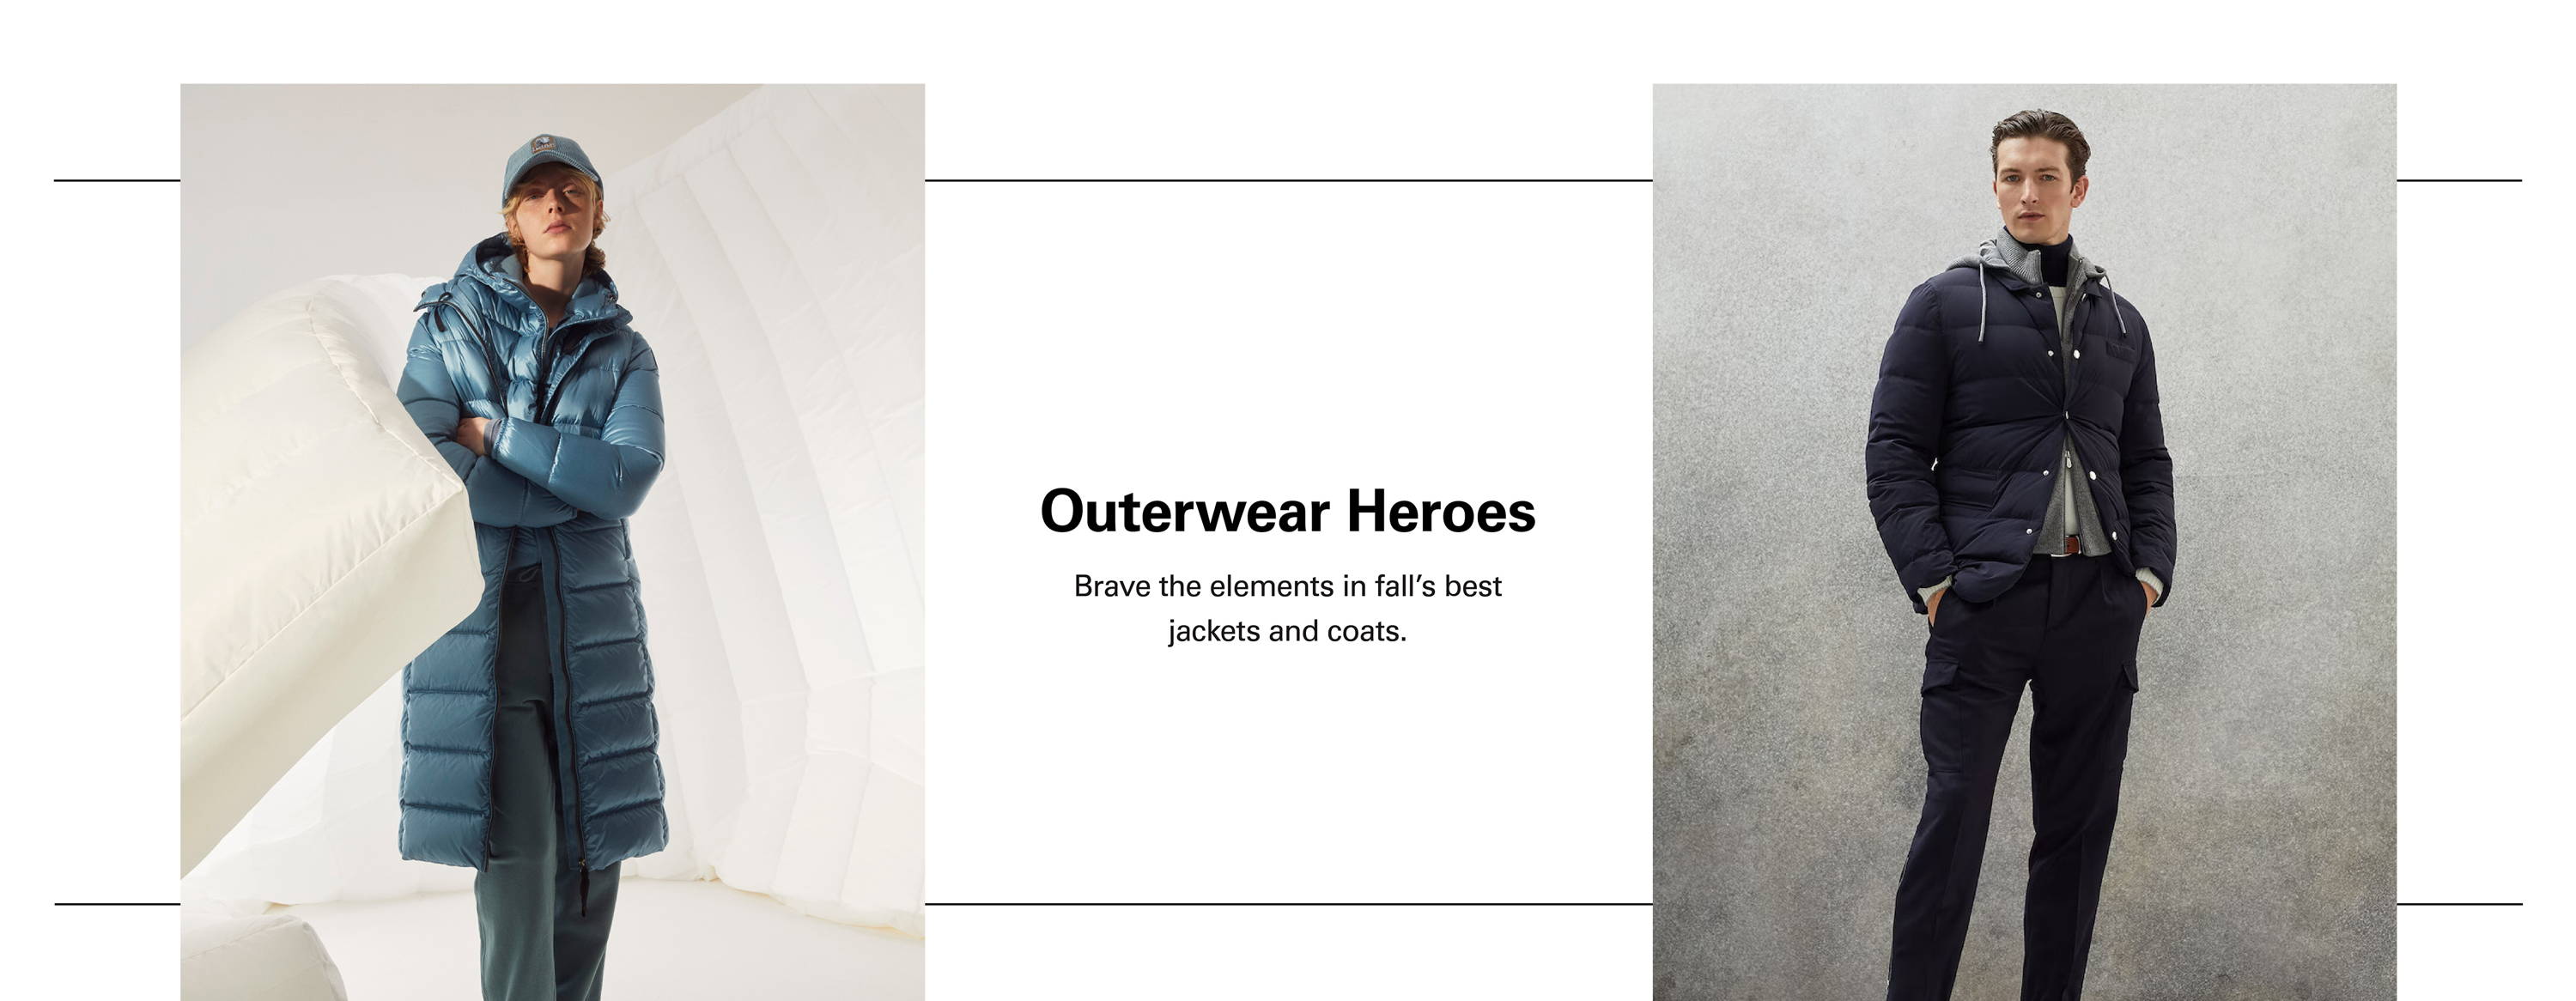 Outerwear Heroes